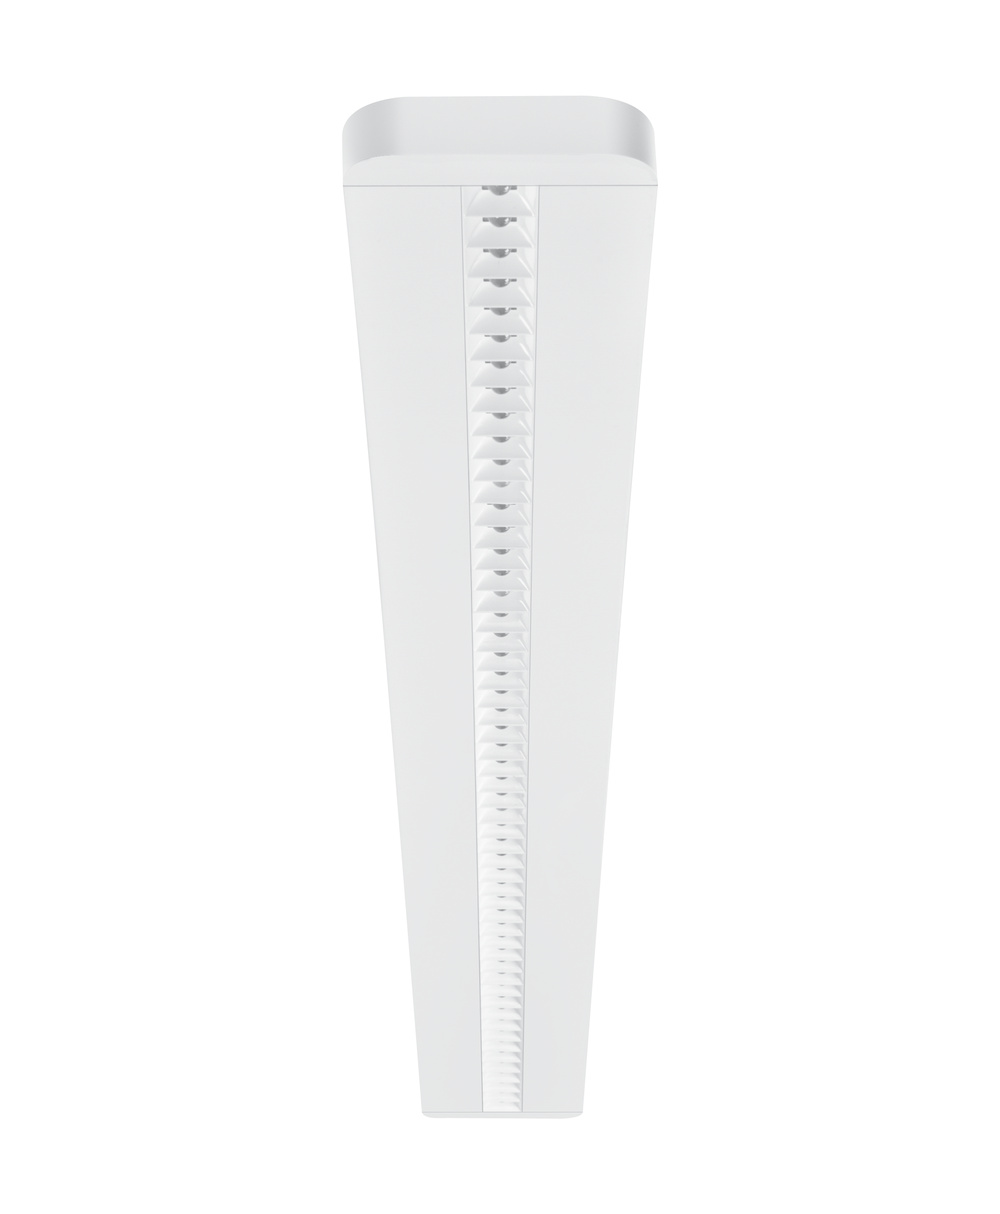 Ledvance LED linear luminaire LINEAR IndiviLED DIRECT 1500 25 W 940 - 4058075522459